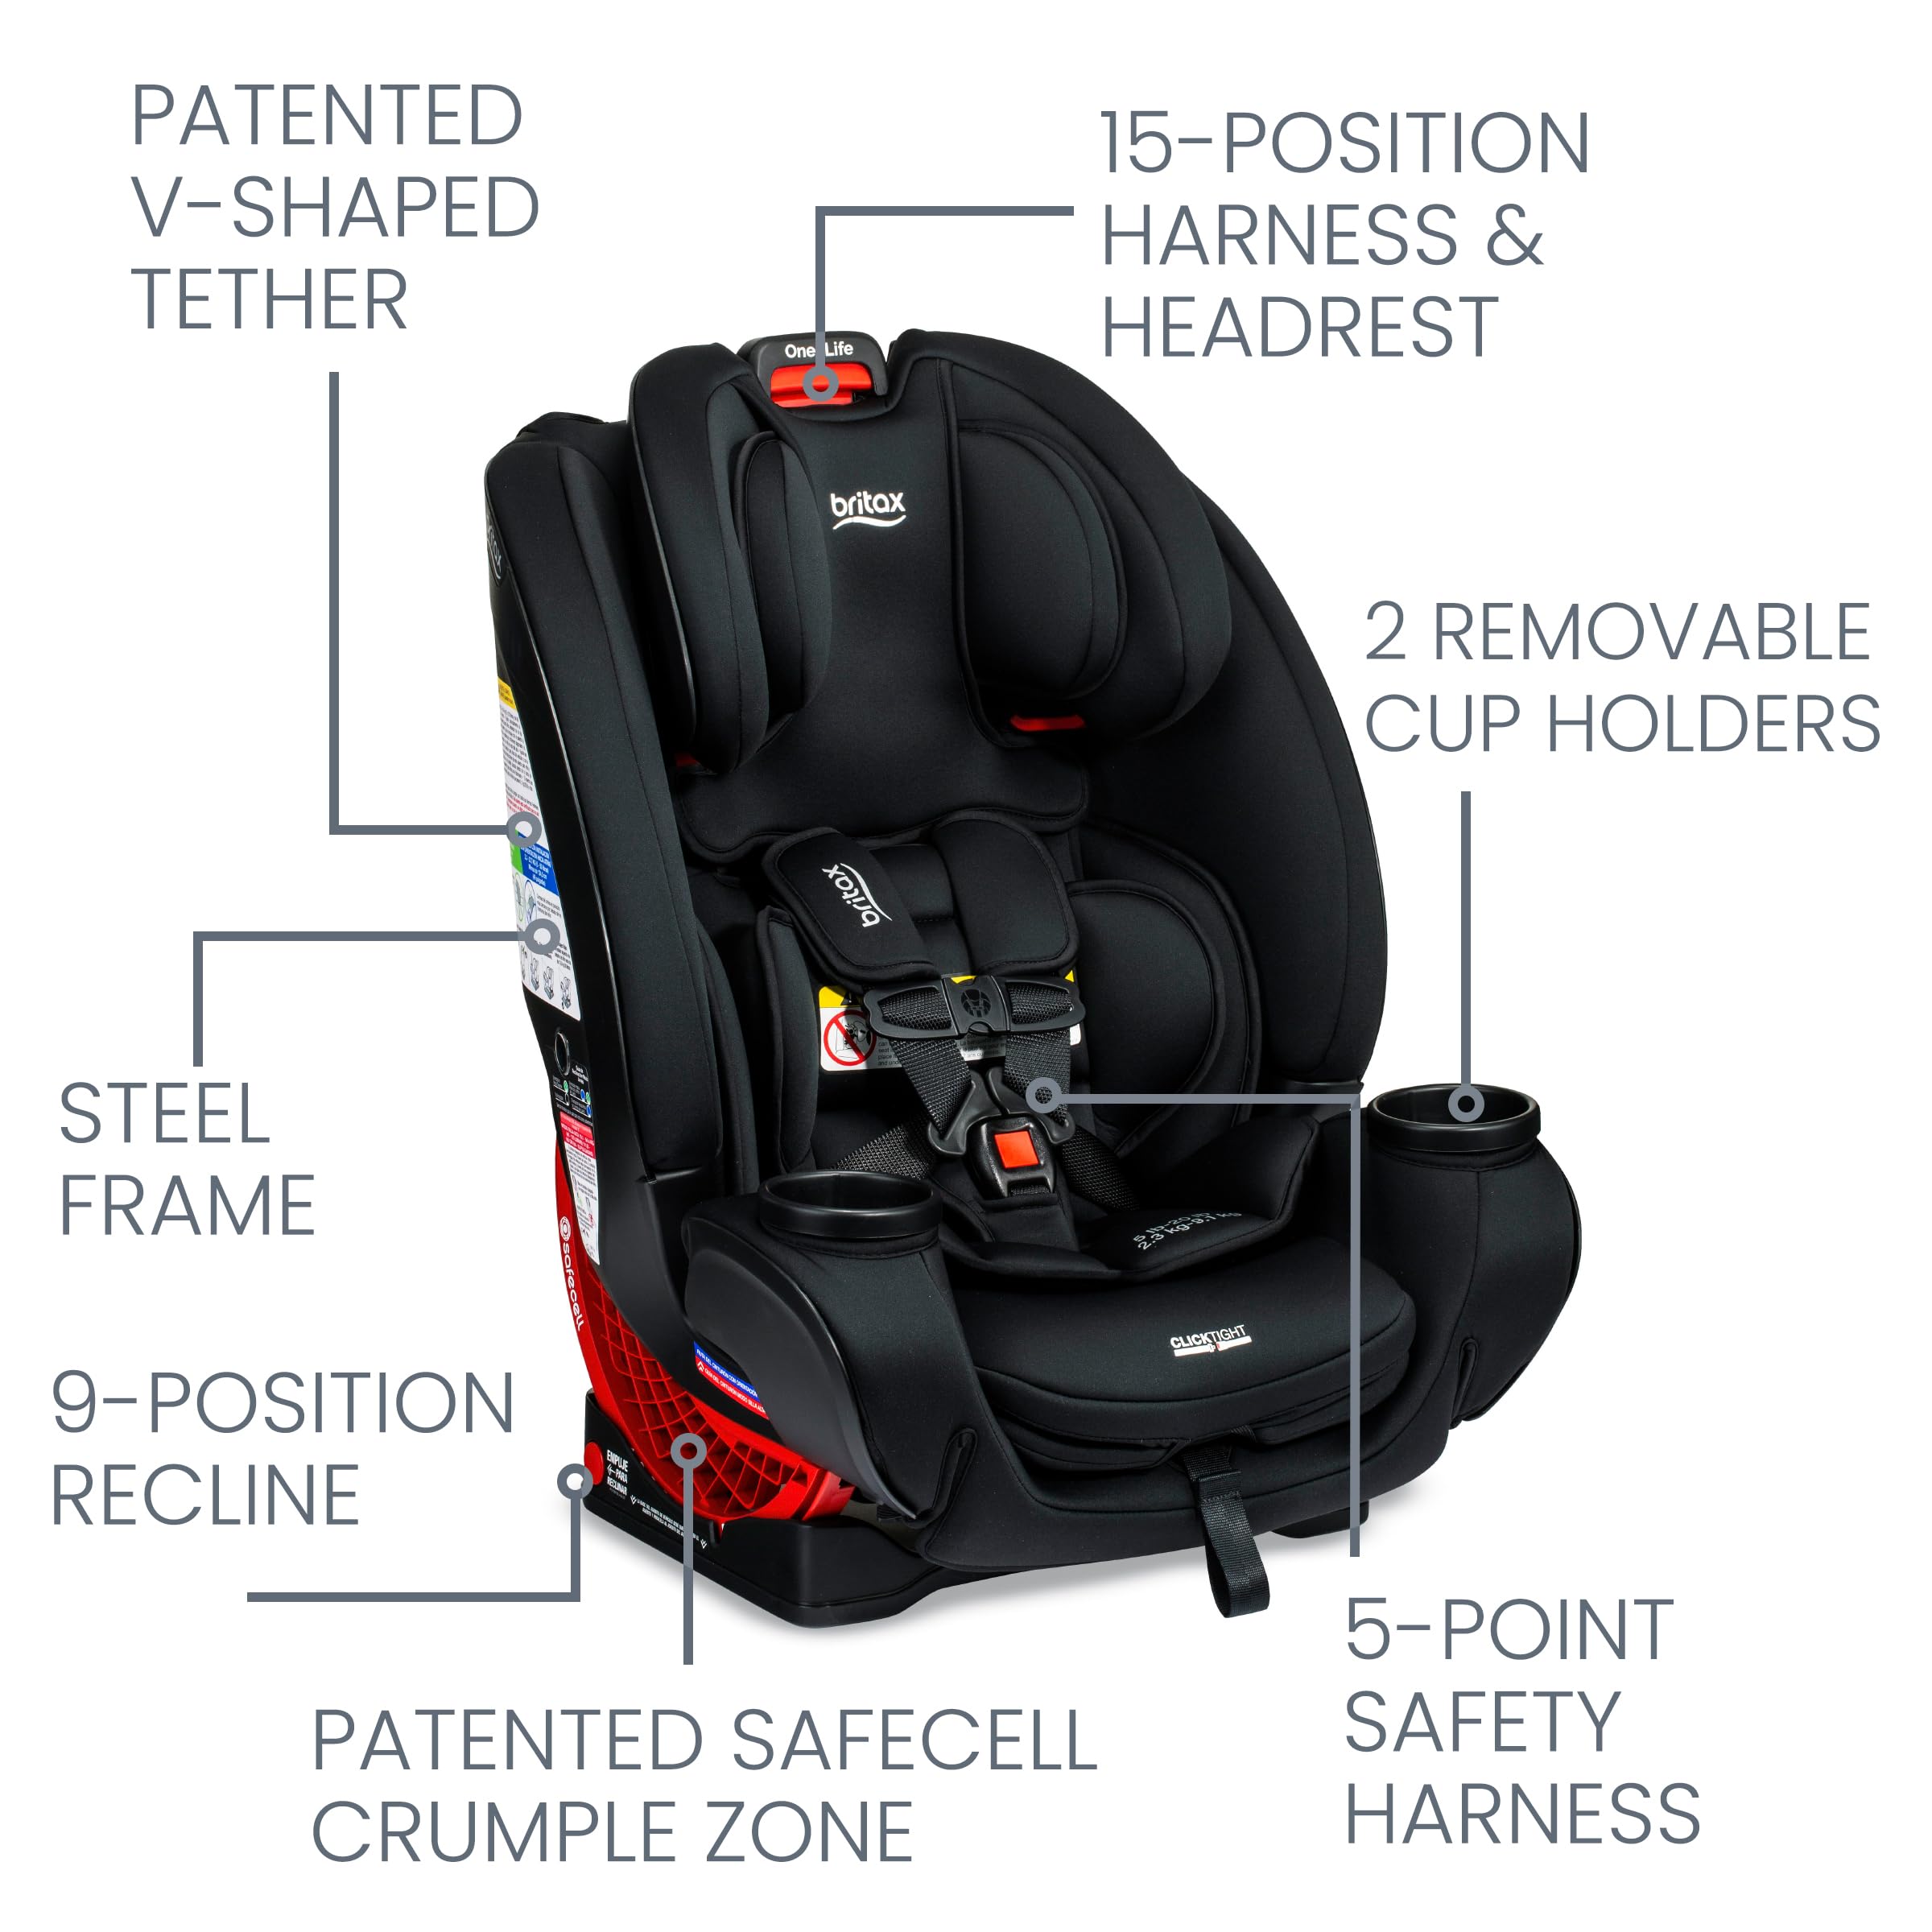 Britax One4Life Convertible Car Seat, 10 Years of Use from 5 to 120 Pounds, Converts from Rear-Facing Infant Car Seat to Forward-Facing Booster Seat, Machine-Washable Fabric, Onyx